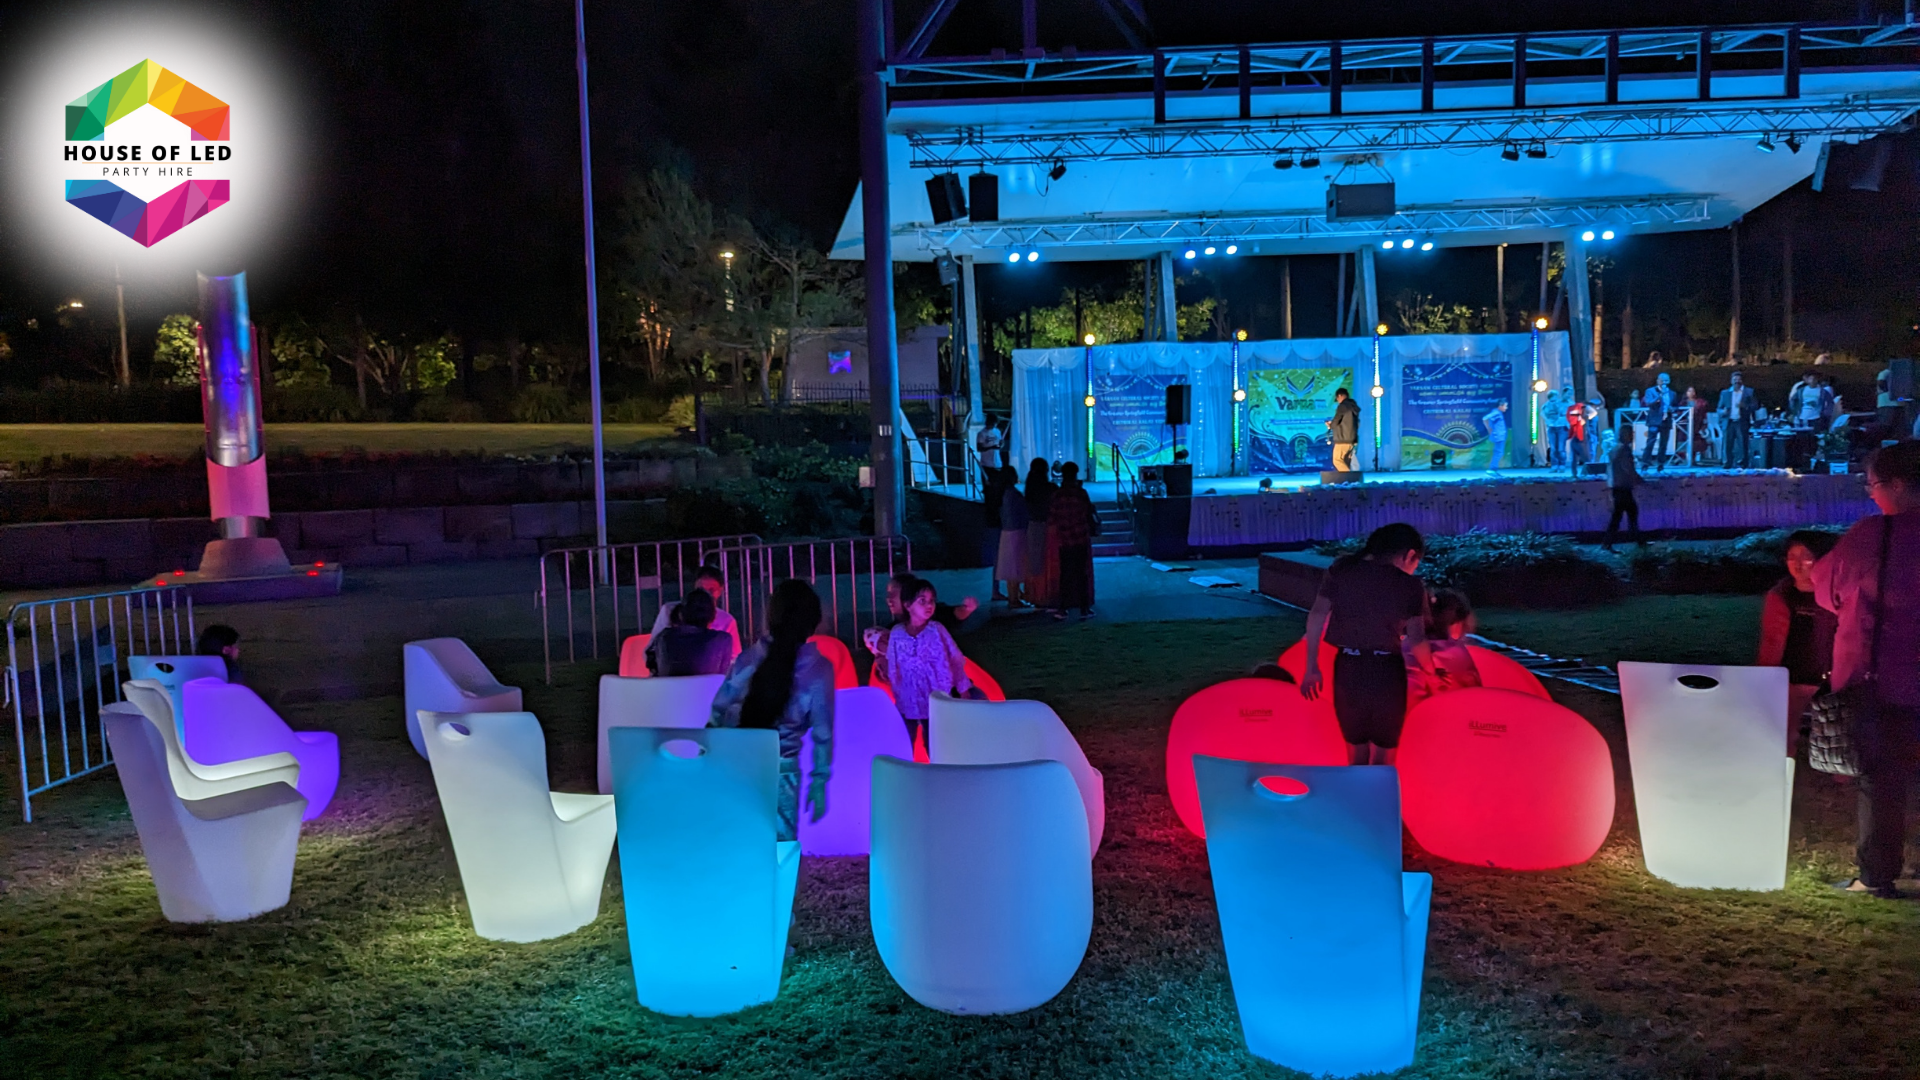 LED Chairs and LED Furniture for party